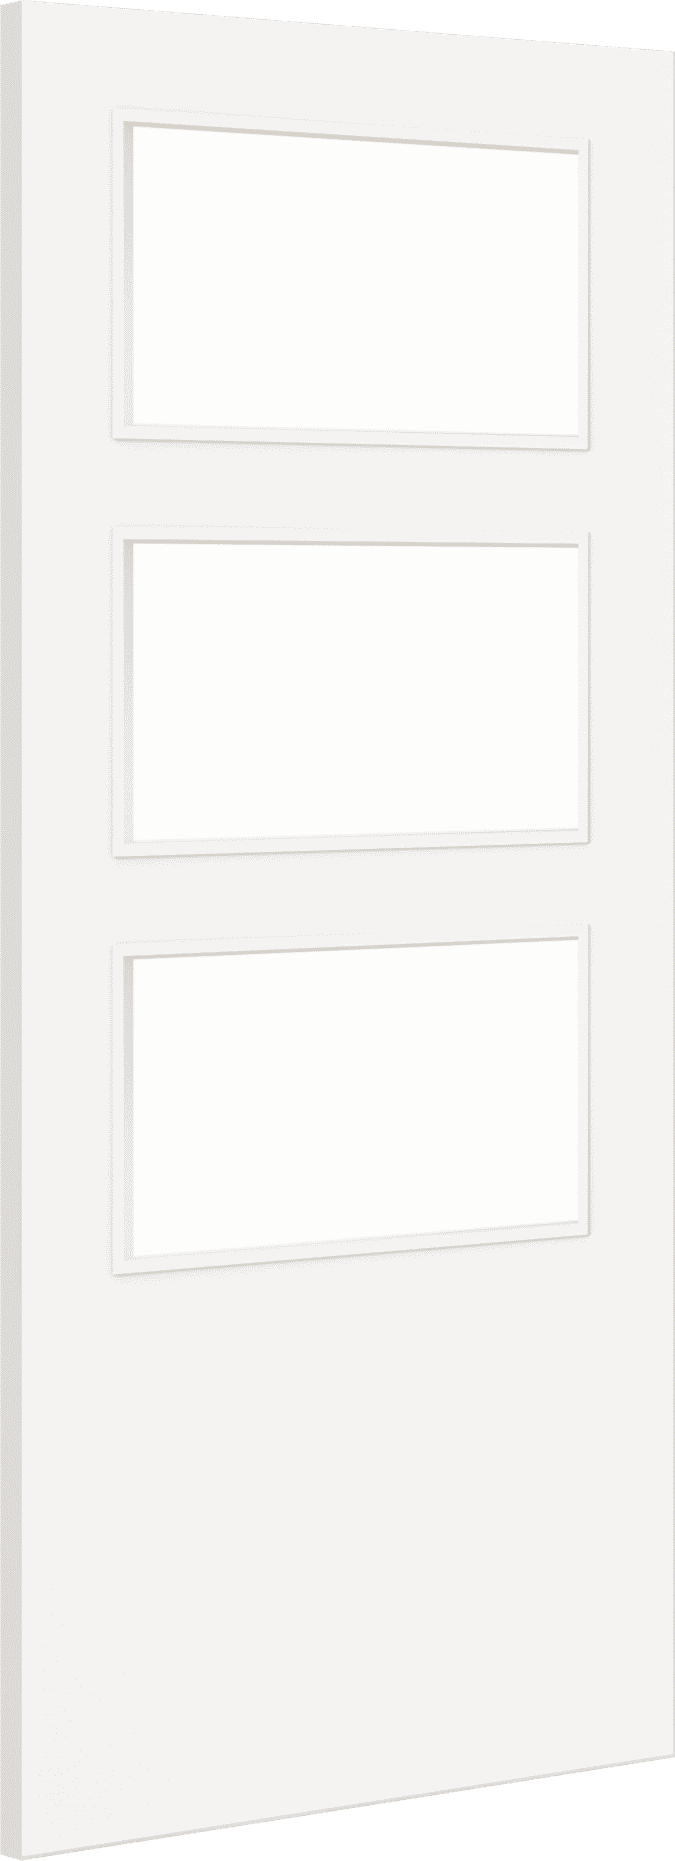 2040mm x 626mm x 44mm Architectural Paint Grade White 03 Clear Glazed Fire Door Blank